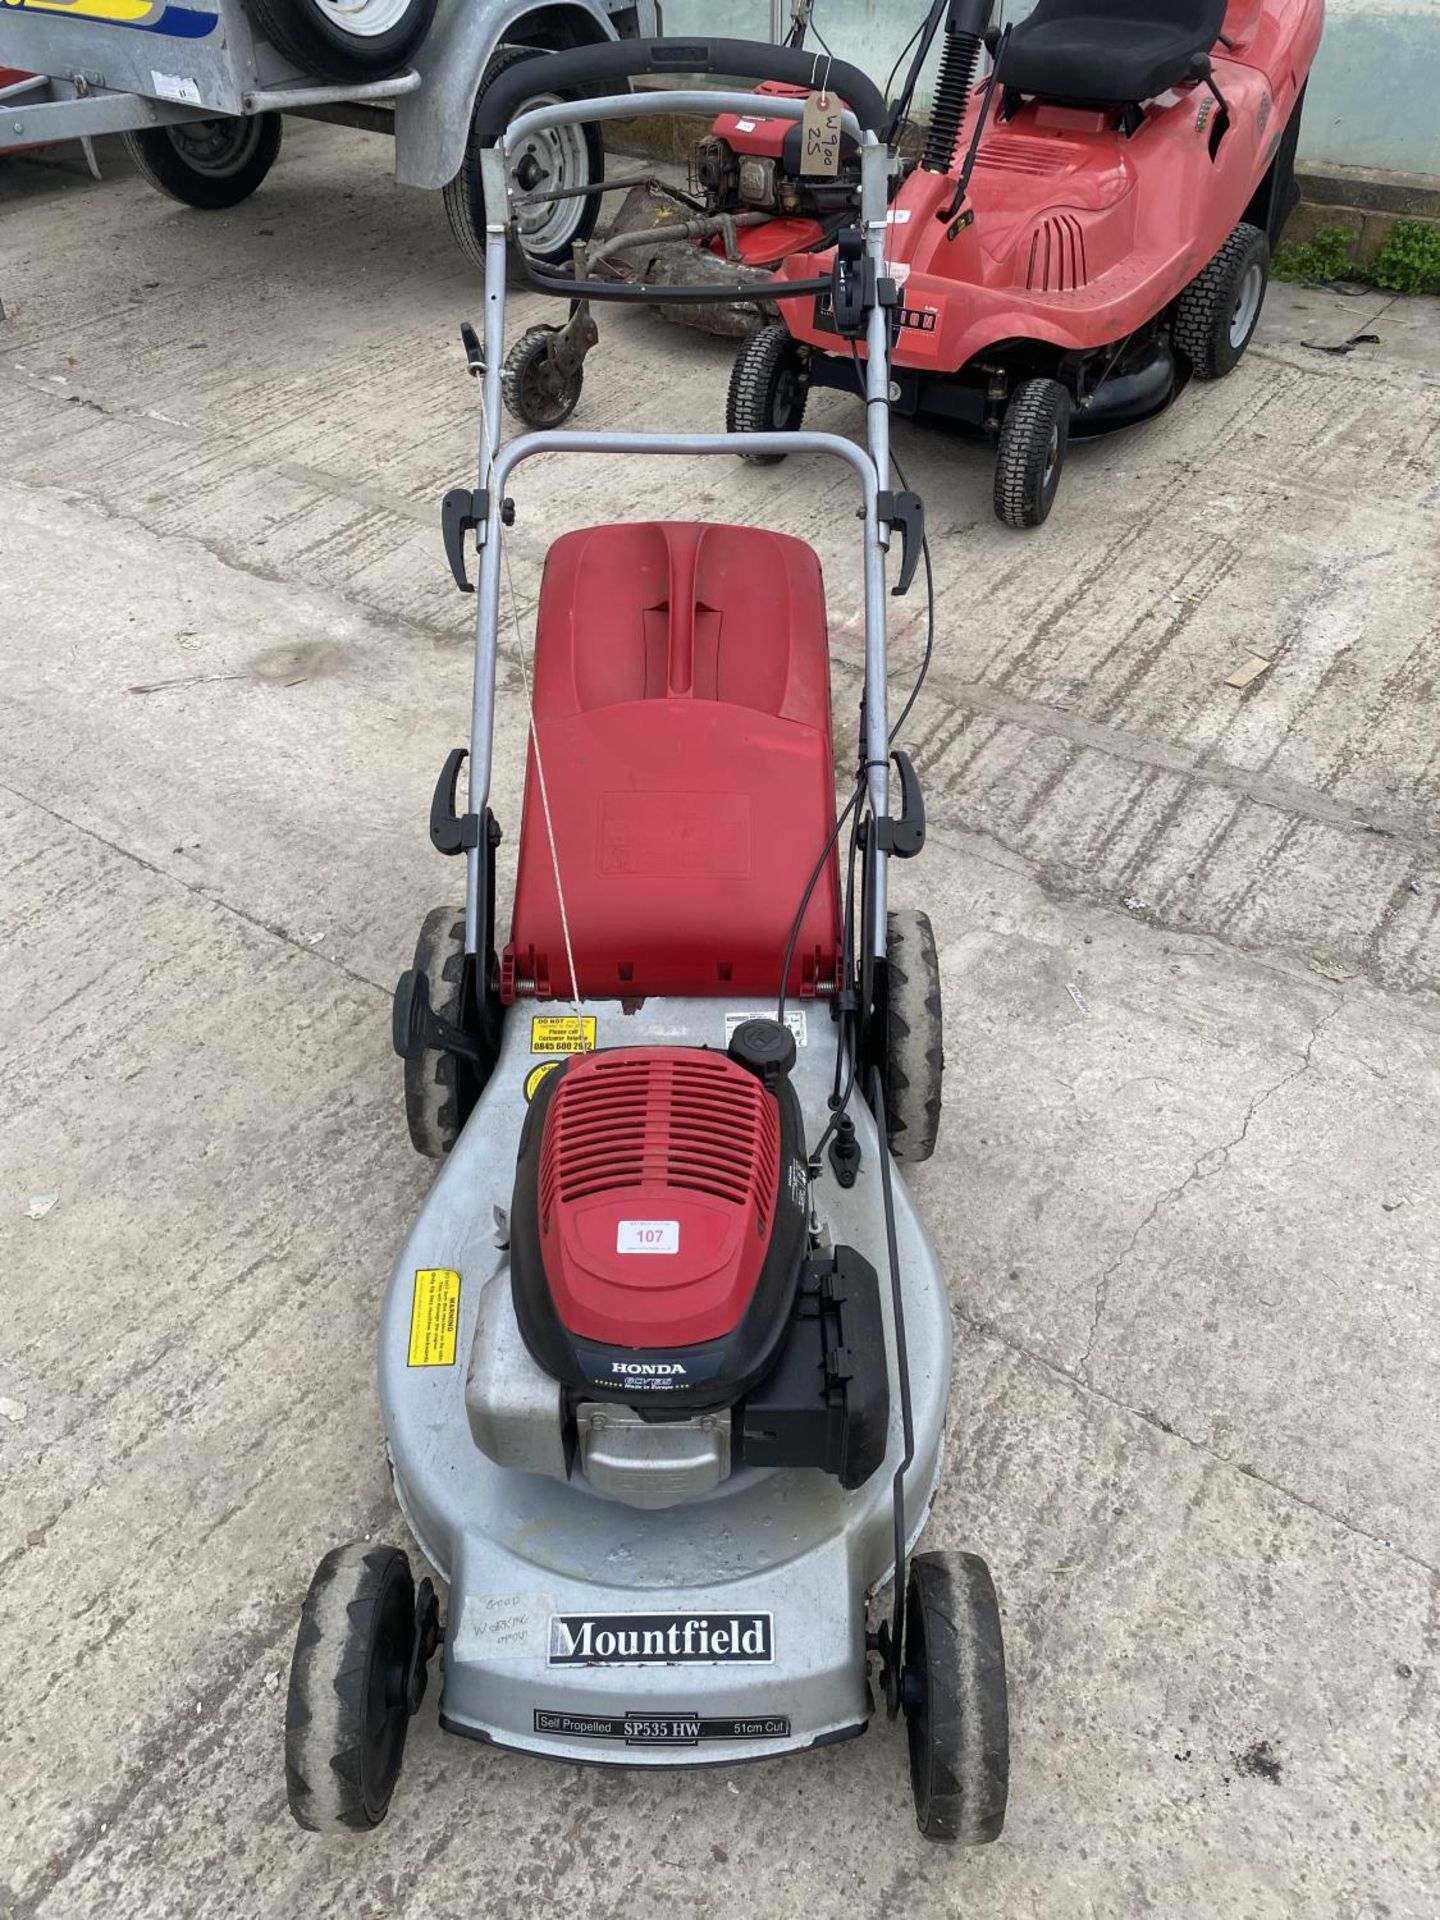 MOUNTFIELD 21" SELF PROPELLED LAWN MOWER WITH HONDA ENGINE & GRASS BOX NO VAT - Image 2 of 5